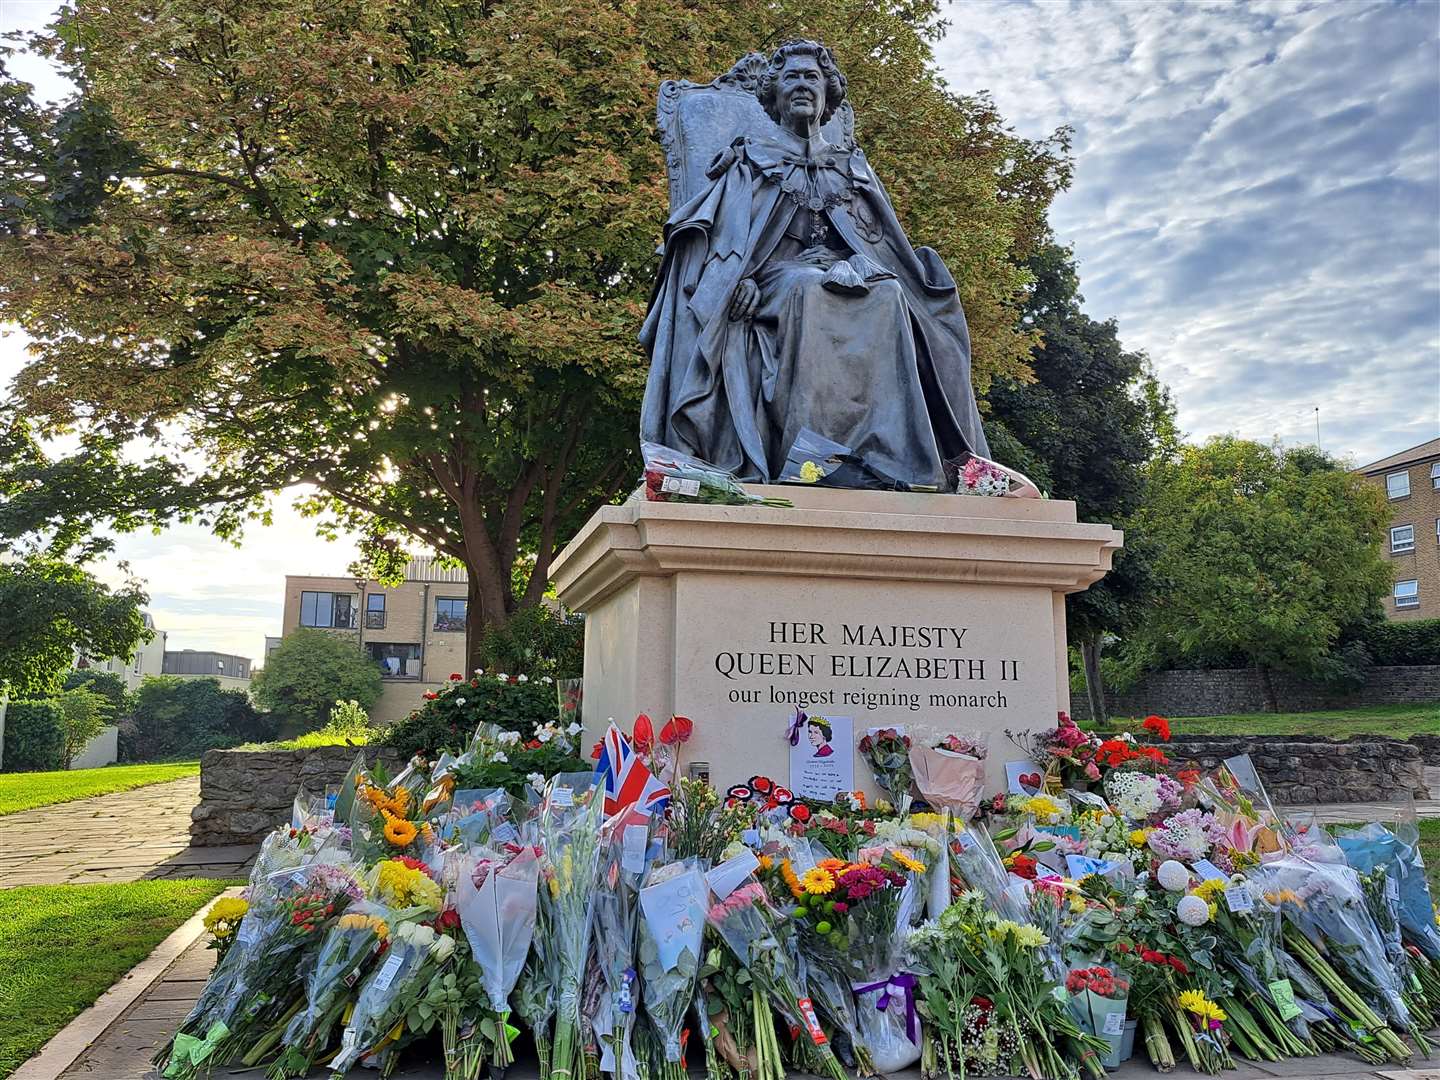 Flowers at the Queen Elizabeth II statue on Monday, September 12